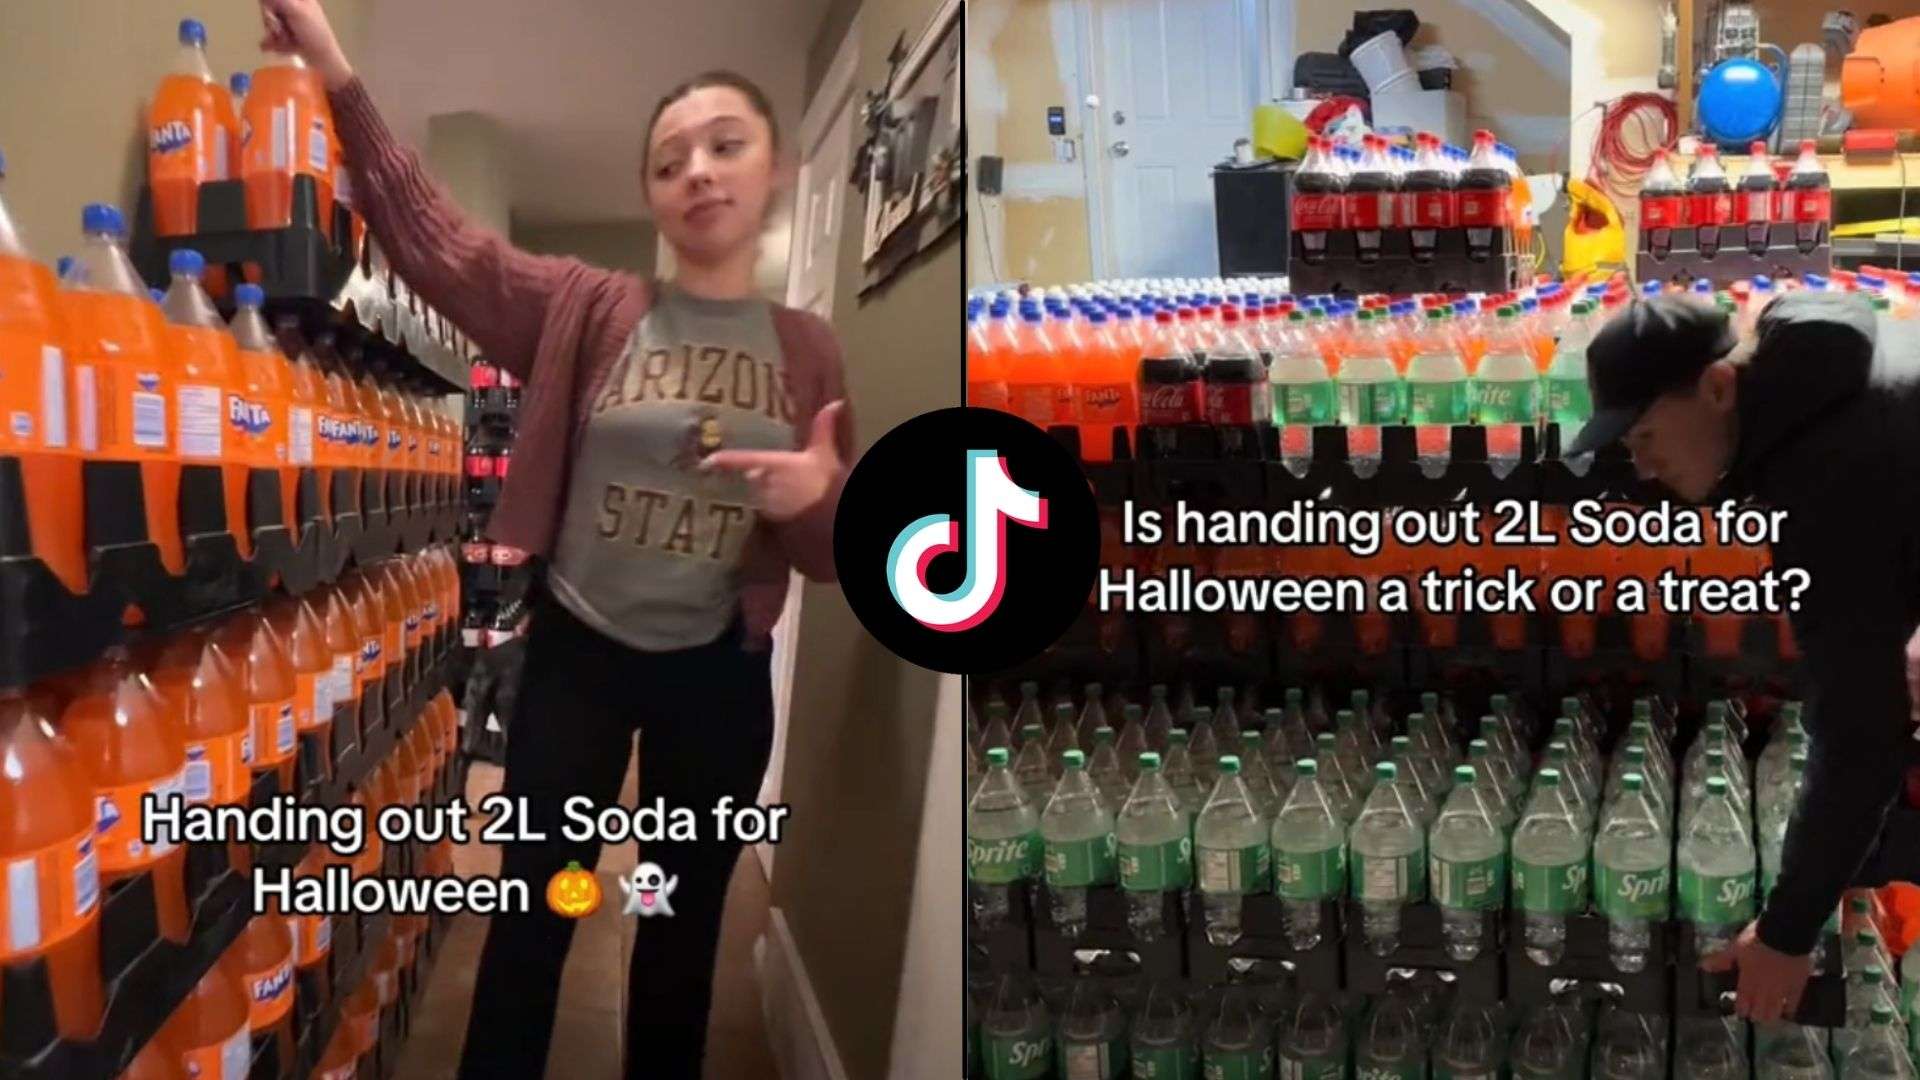 Woman standing around pallets of soda bottles with halloween text on-screen